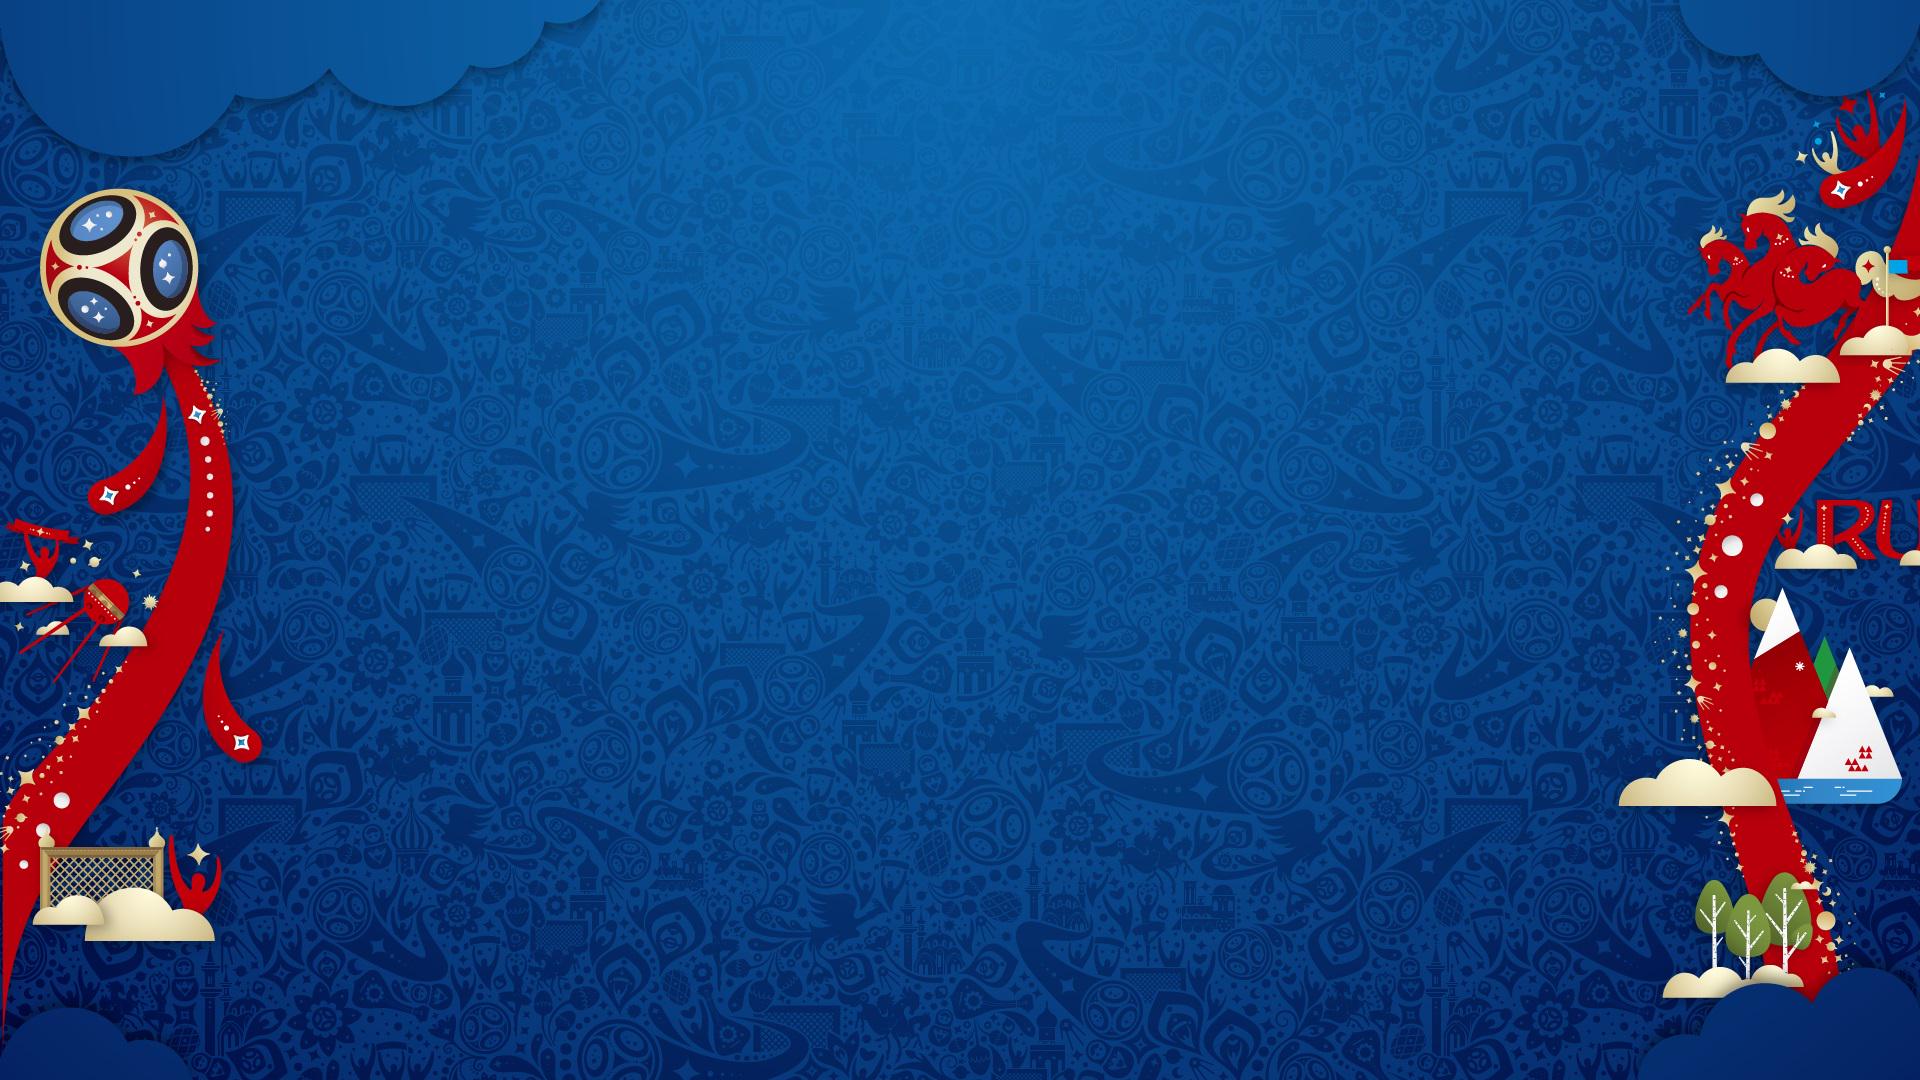 Best Mobile World Cup Backgrounds